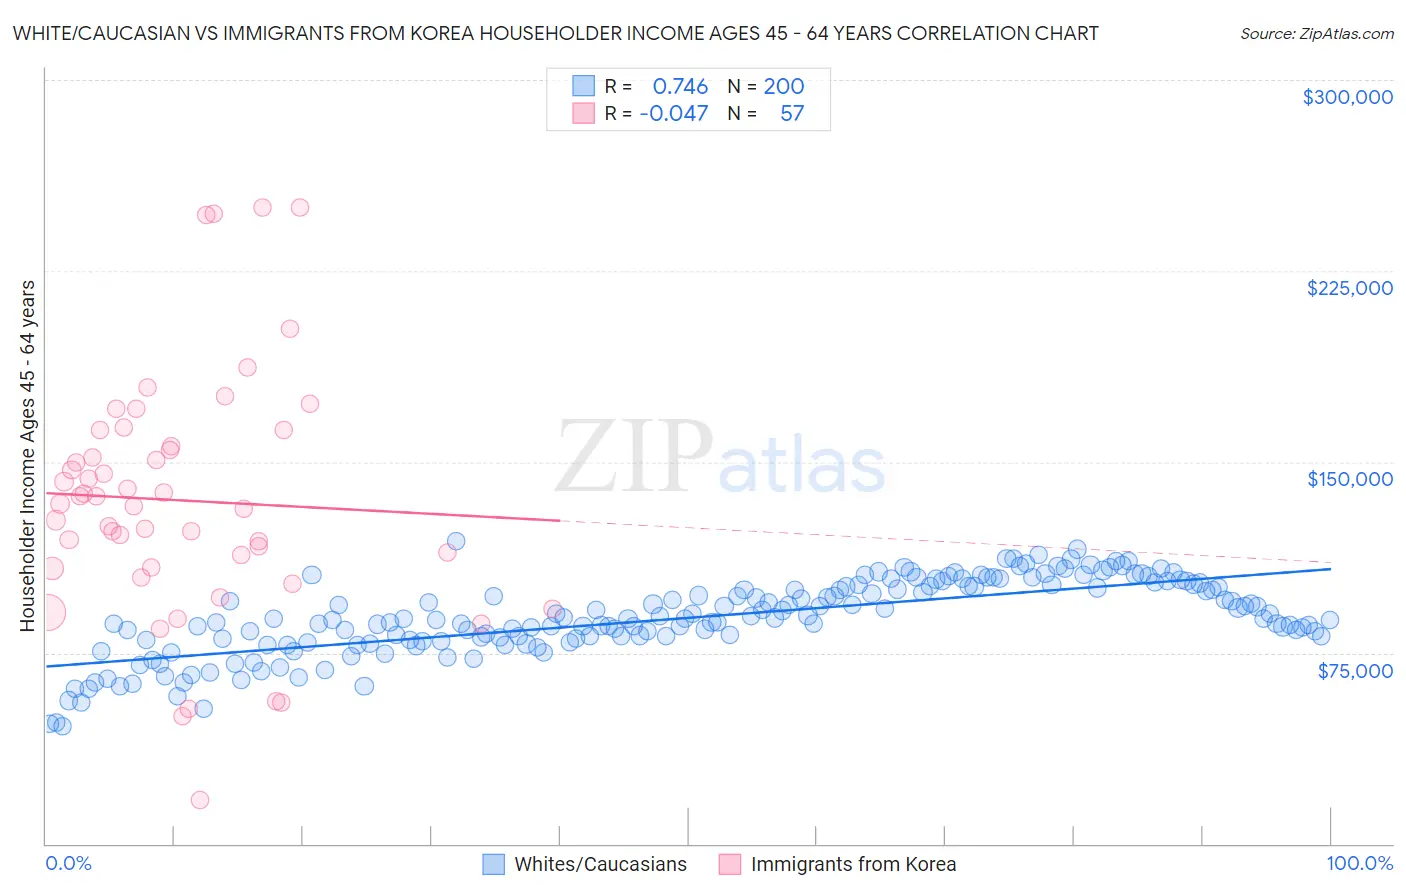 White/Caucasian vs Immigrants from Korea Householder Income Ages 45 - 64 years